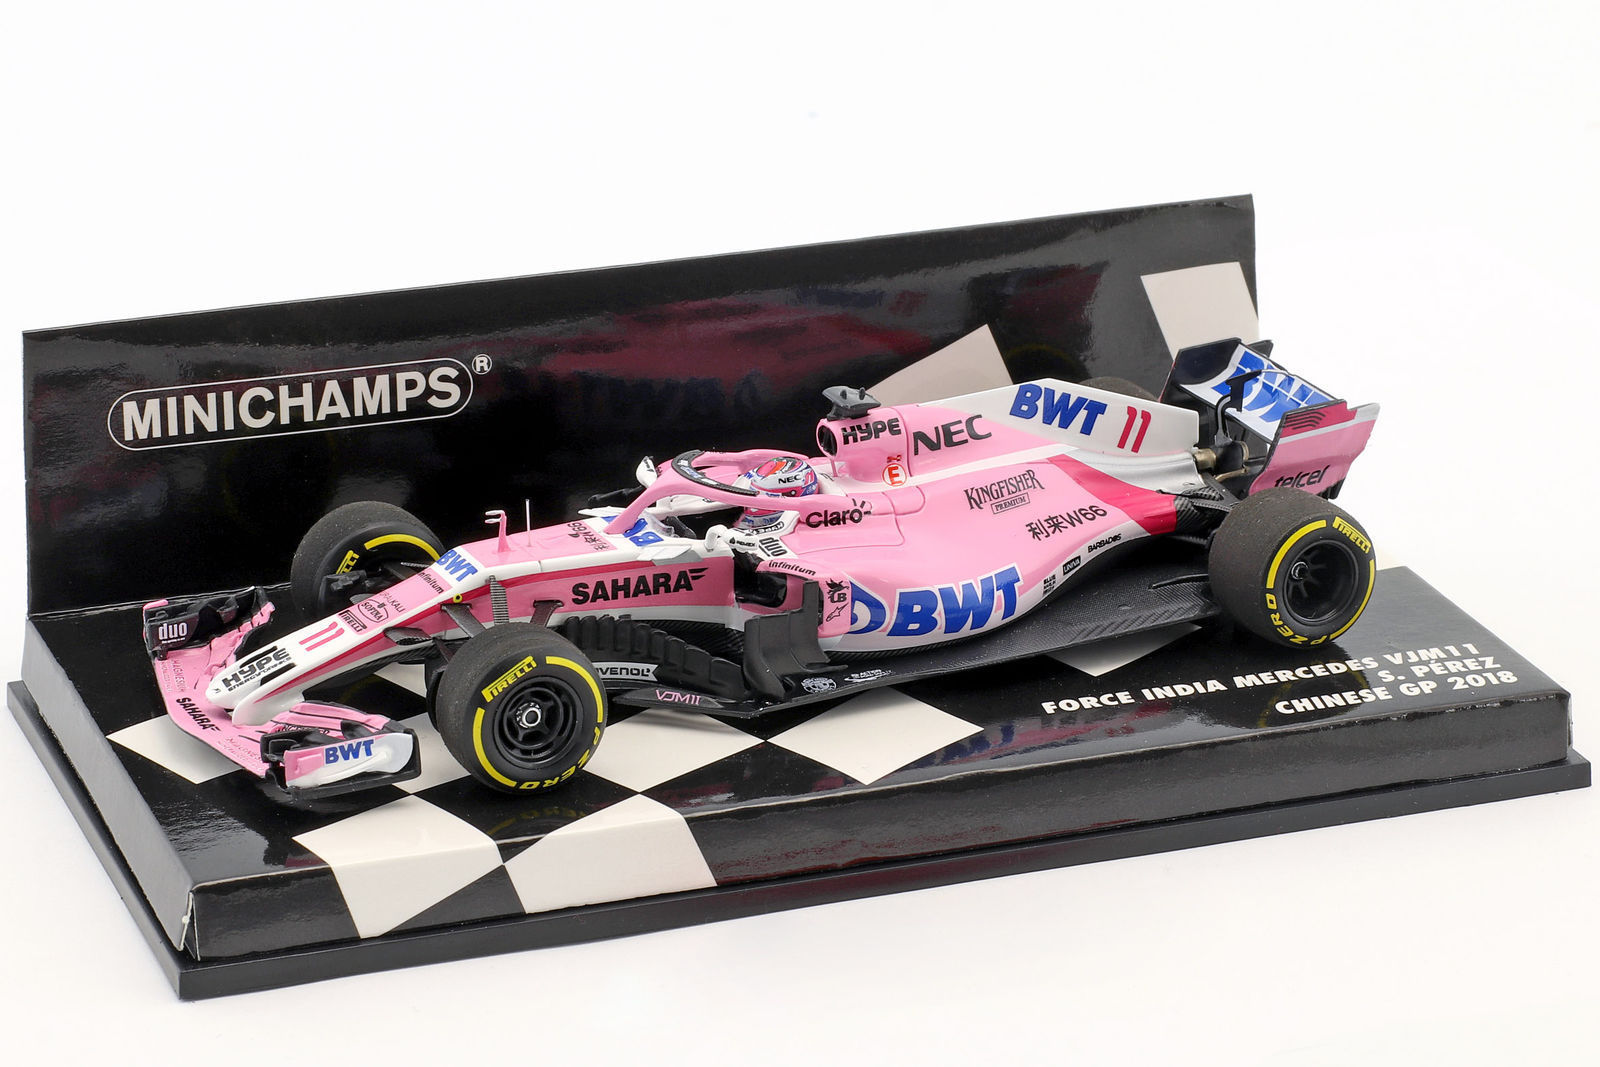 F1 Force India Vjm11 Perez Chinese GP 2018 1/43 MINICHAMPS 417180011 for sale online 